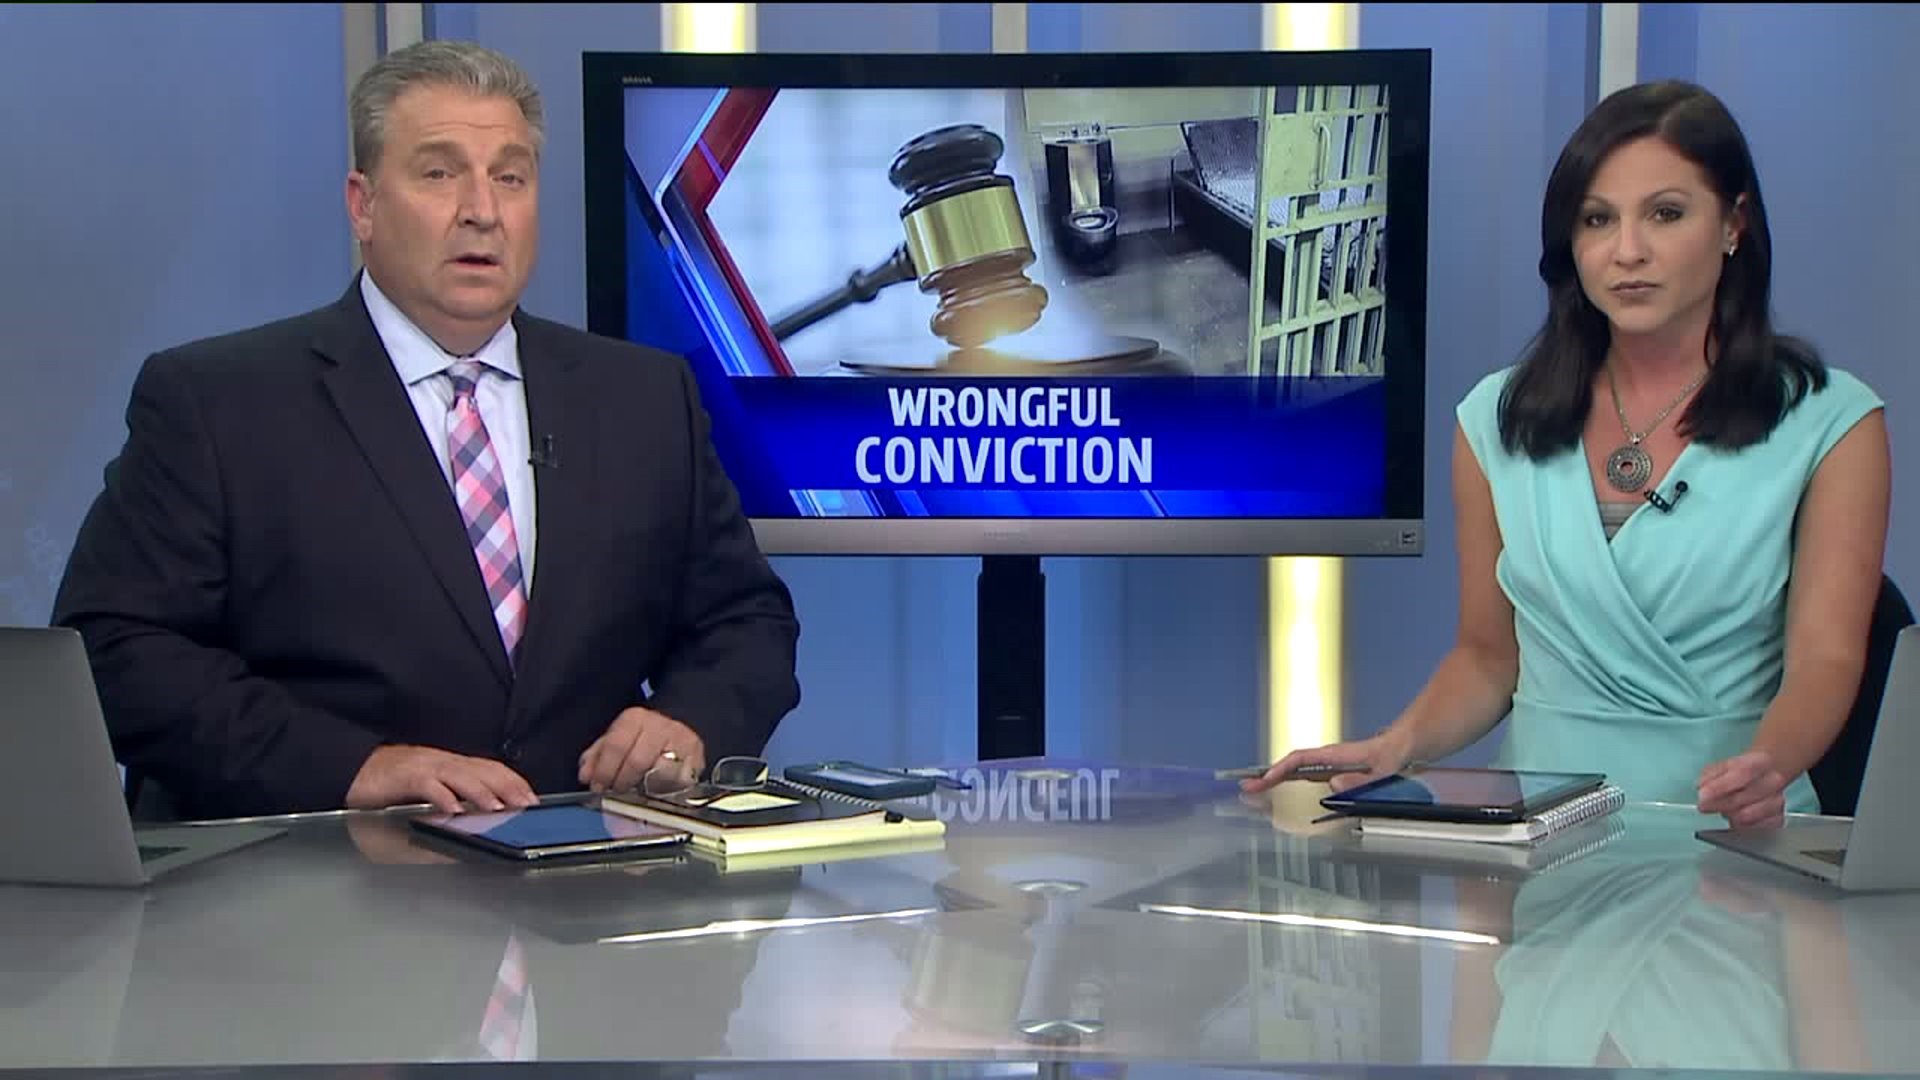 MAN FREED AFTER WRONGFUL MURDER CONVICTION